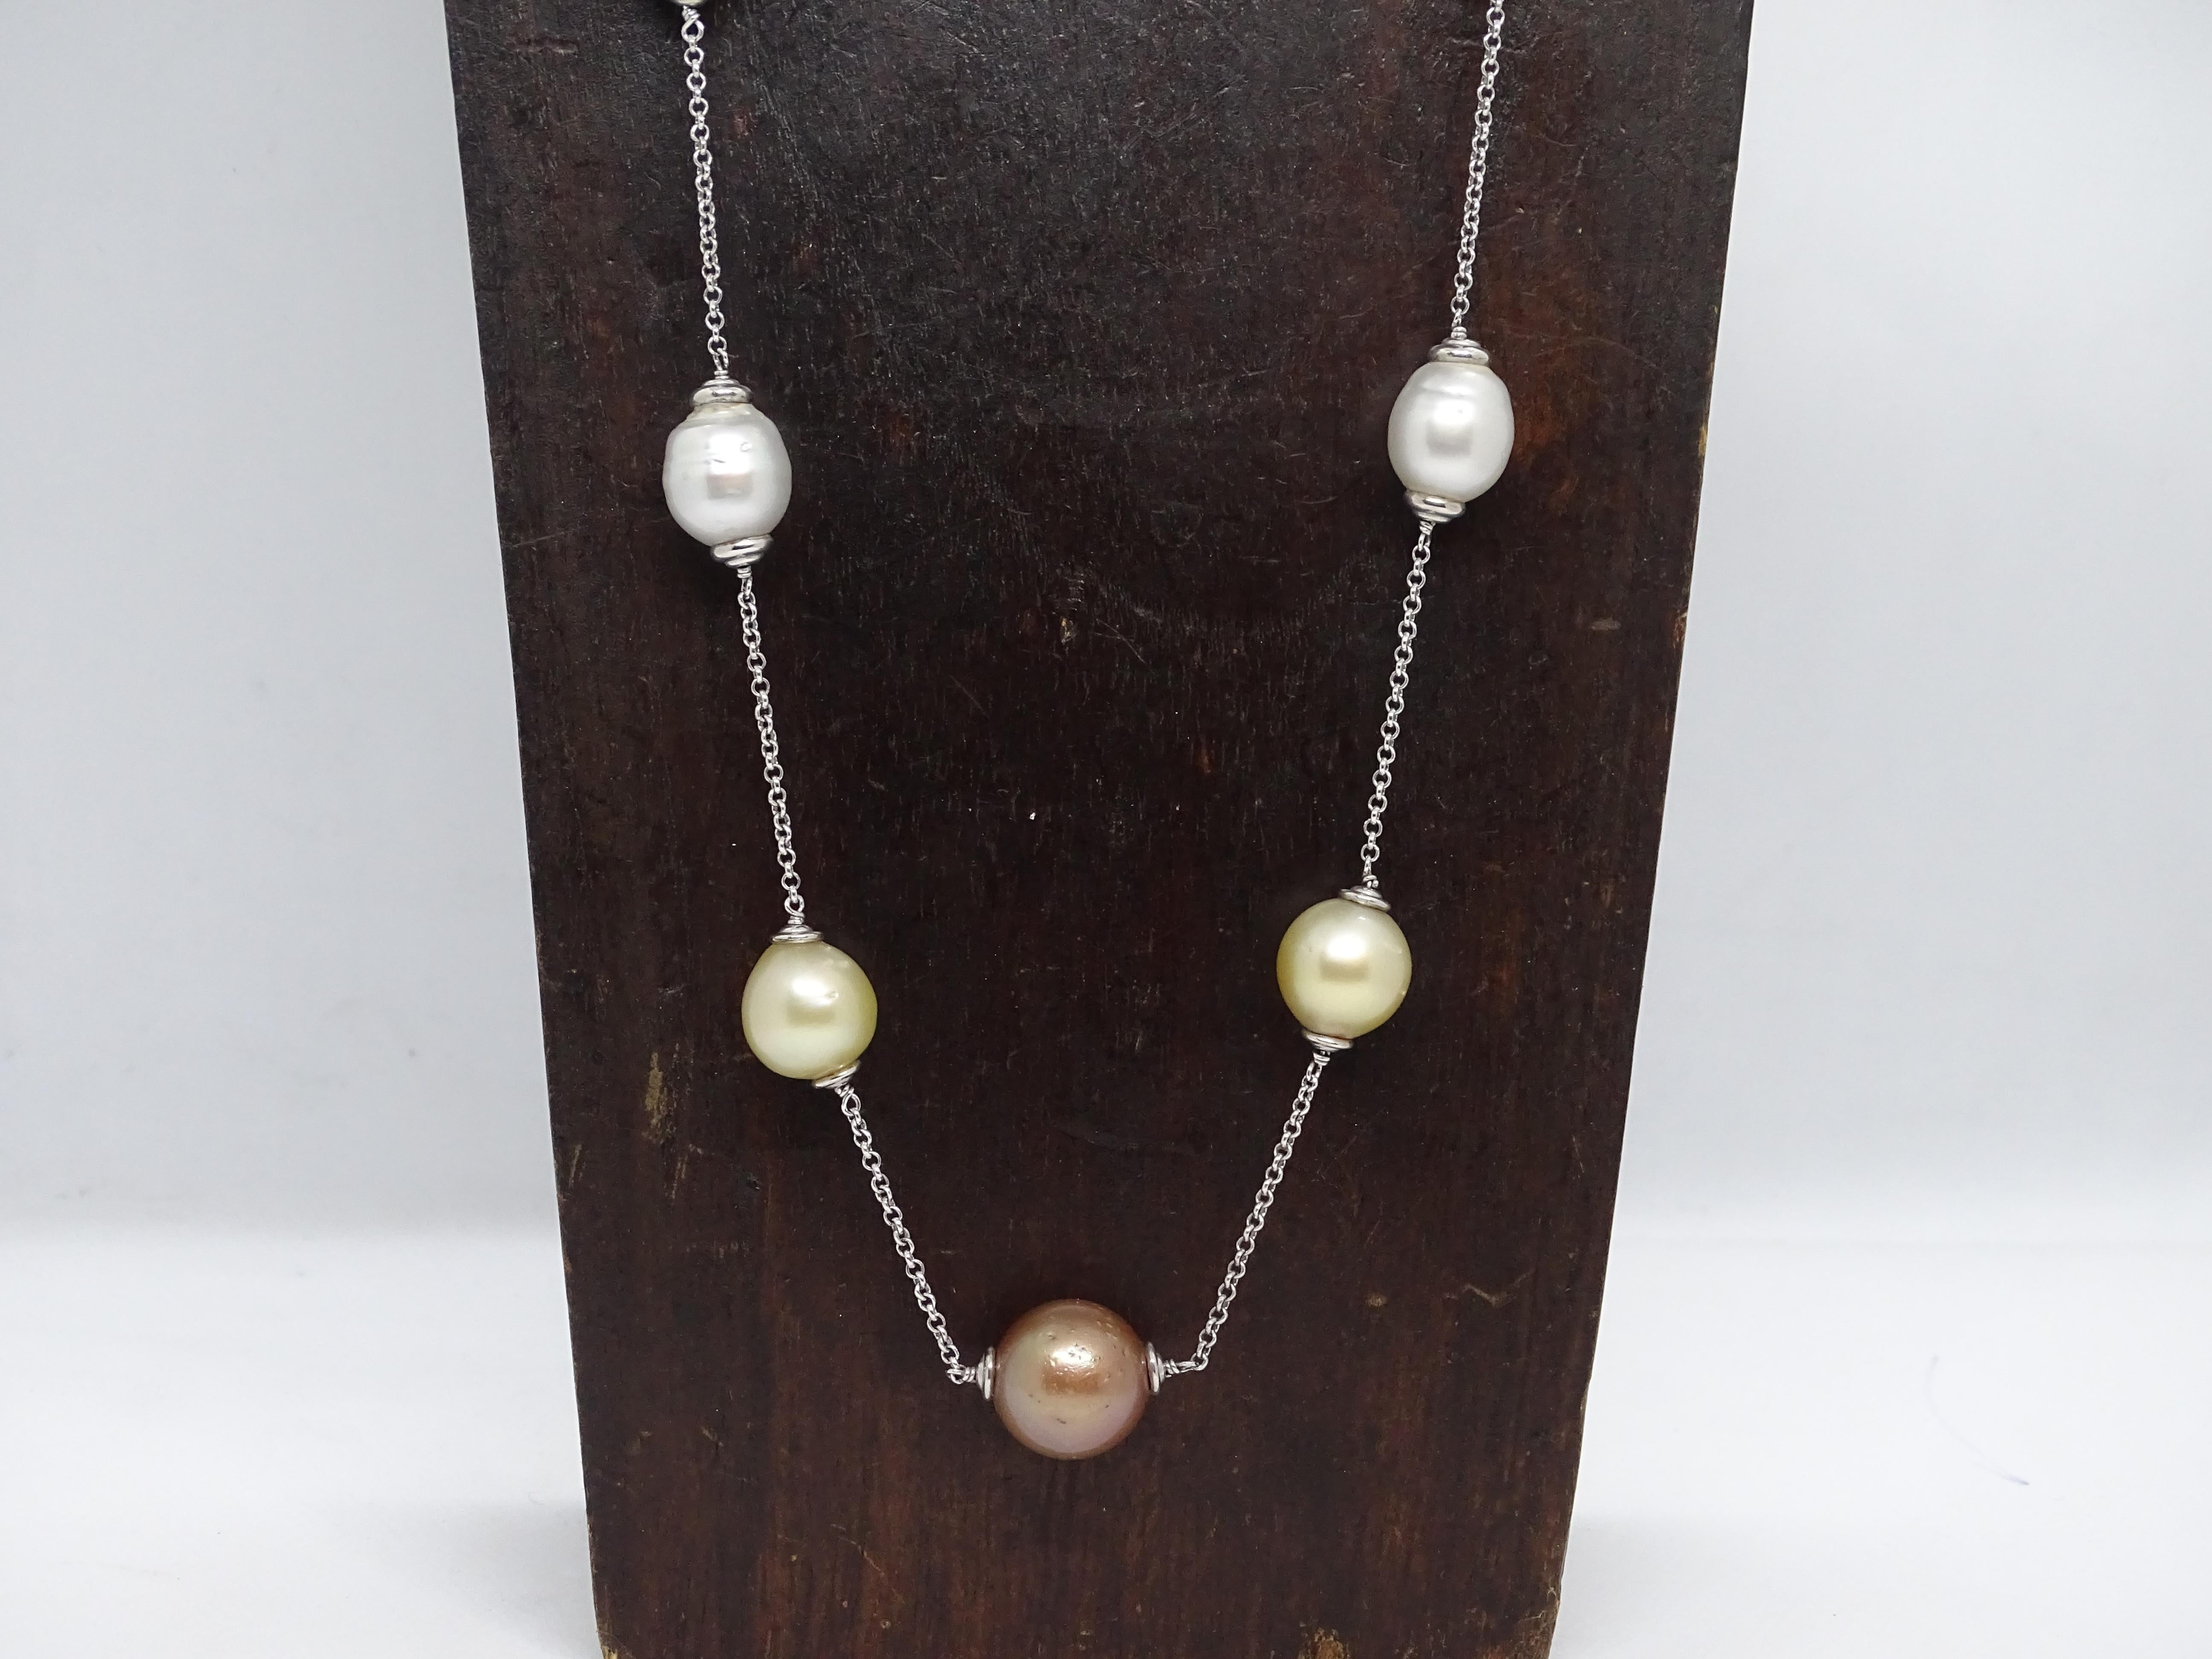 Australian, golden, tahitian and chocolate pearl necklace - white gold chain 2